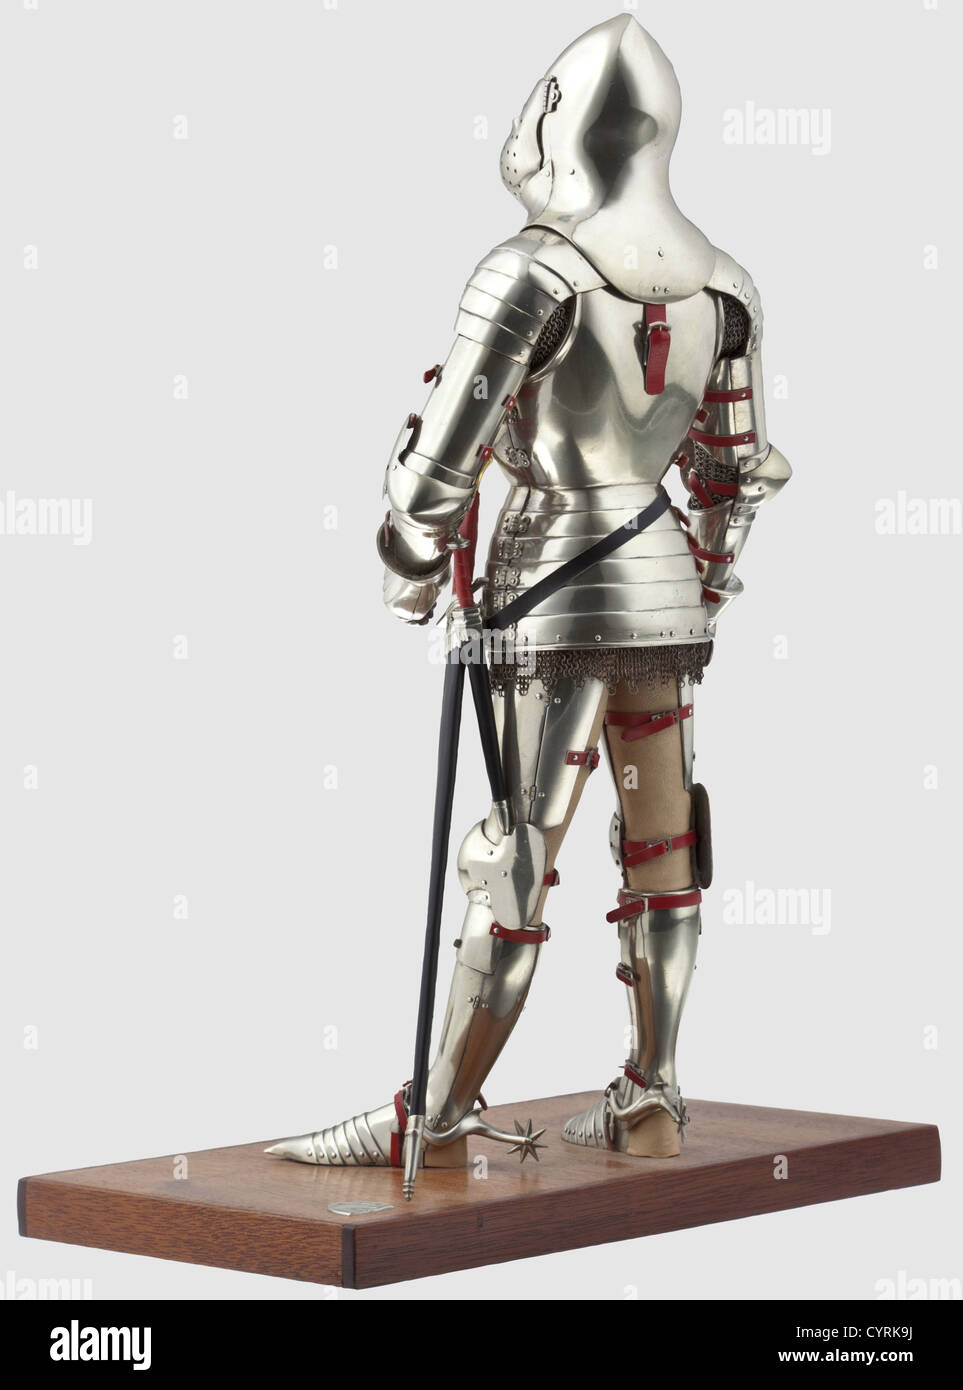 Peter Wroe - A fine Spanish miniature full armour,in the style of 1425-1450,20th century Accurately represented to scale in white metal alloy,leathered and highly detailed throughout,partly articulated,including 'great' bascinet attached to the cuirass by straps front and rear,the cuirass and fauld each hinged on the left and closed by straps on the right,mail skirt,'hourglass' gauntlets,shaped rectangular besagews,sabatons attached by laces,rowel spurs,rondel dagger and arming sword. On its leather-covered figural stand with carved painted resin fa,Additional-Rights-Clearences-Not Available Stock Photo